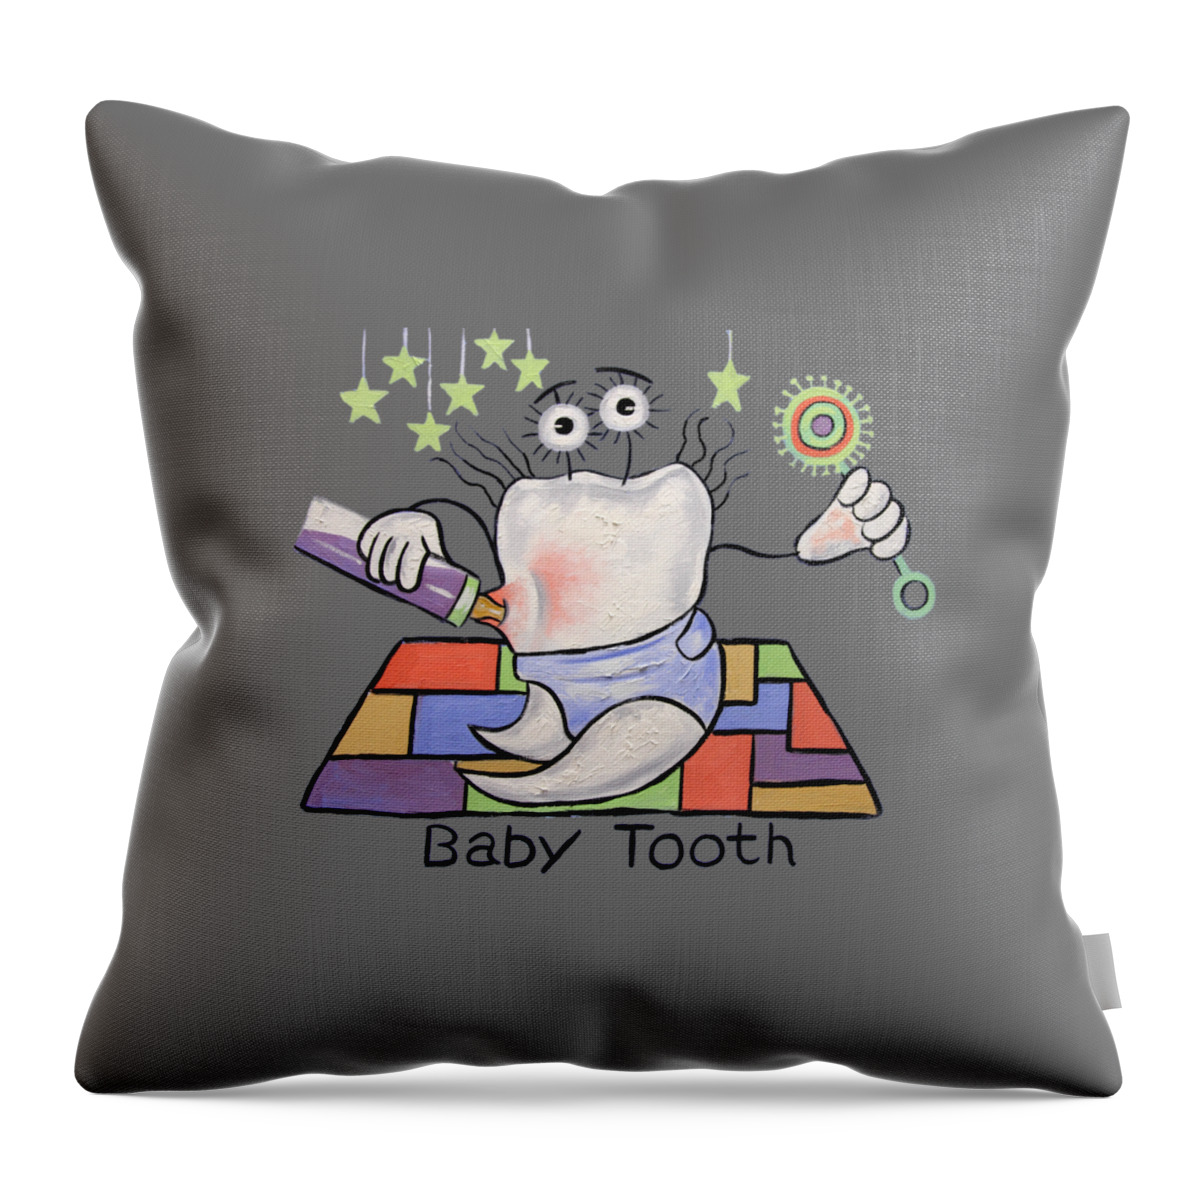 Baby Tooth T-shirts Throw Pillow featuring the painting Baby Tooth T-Shirt by Anthony Falbo